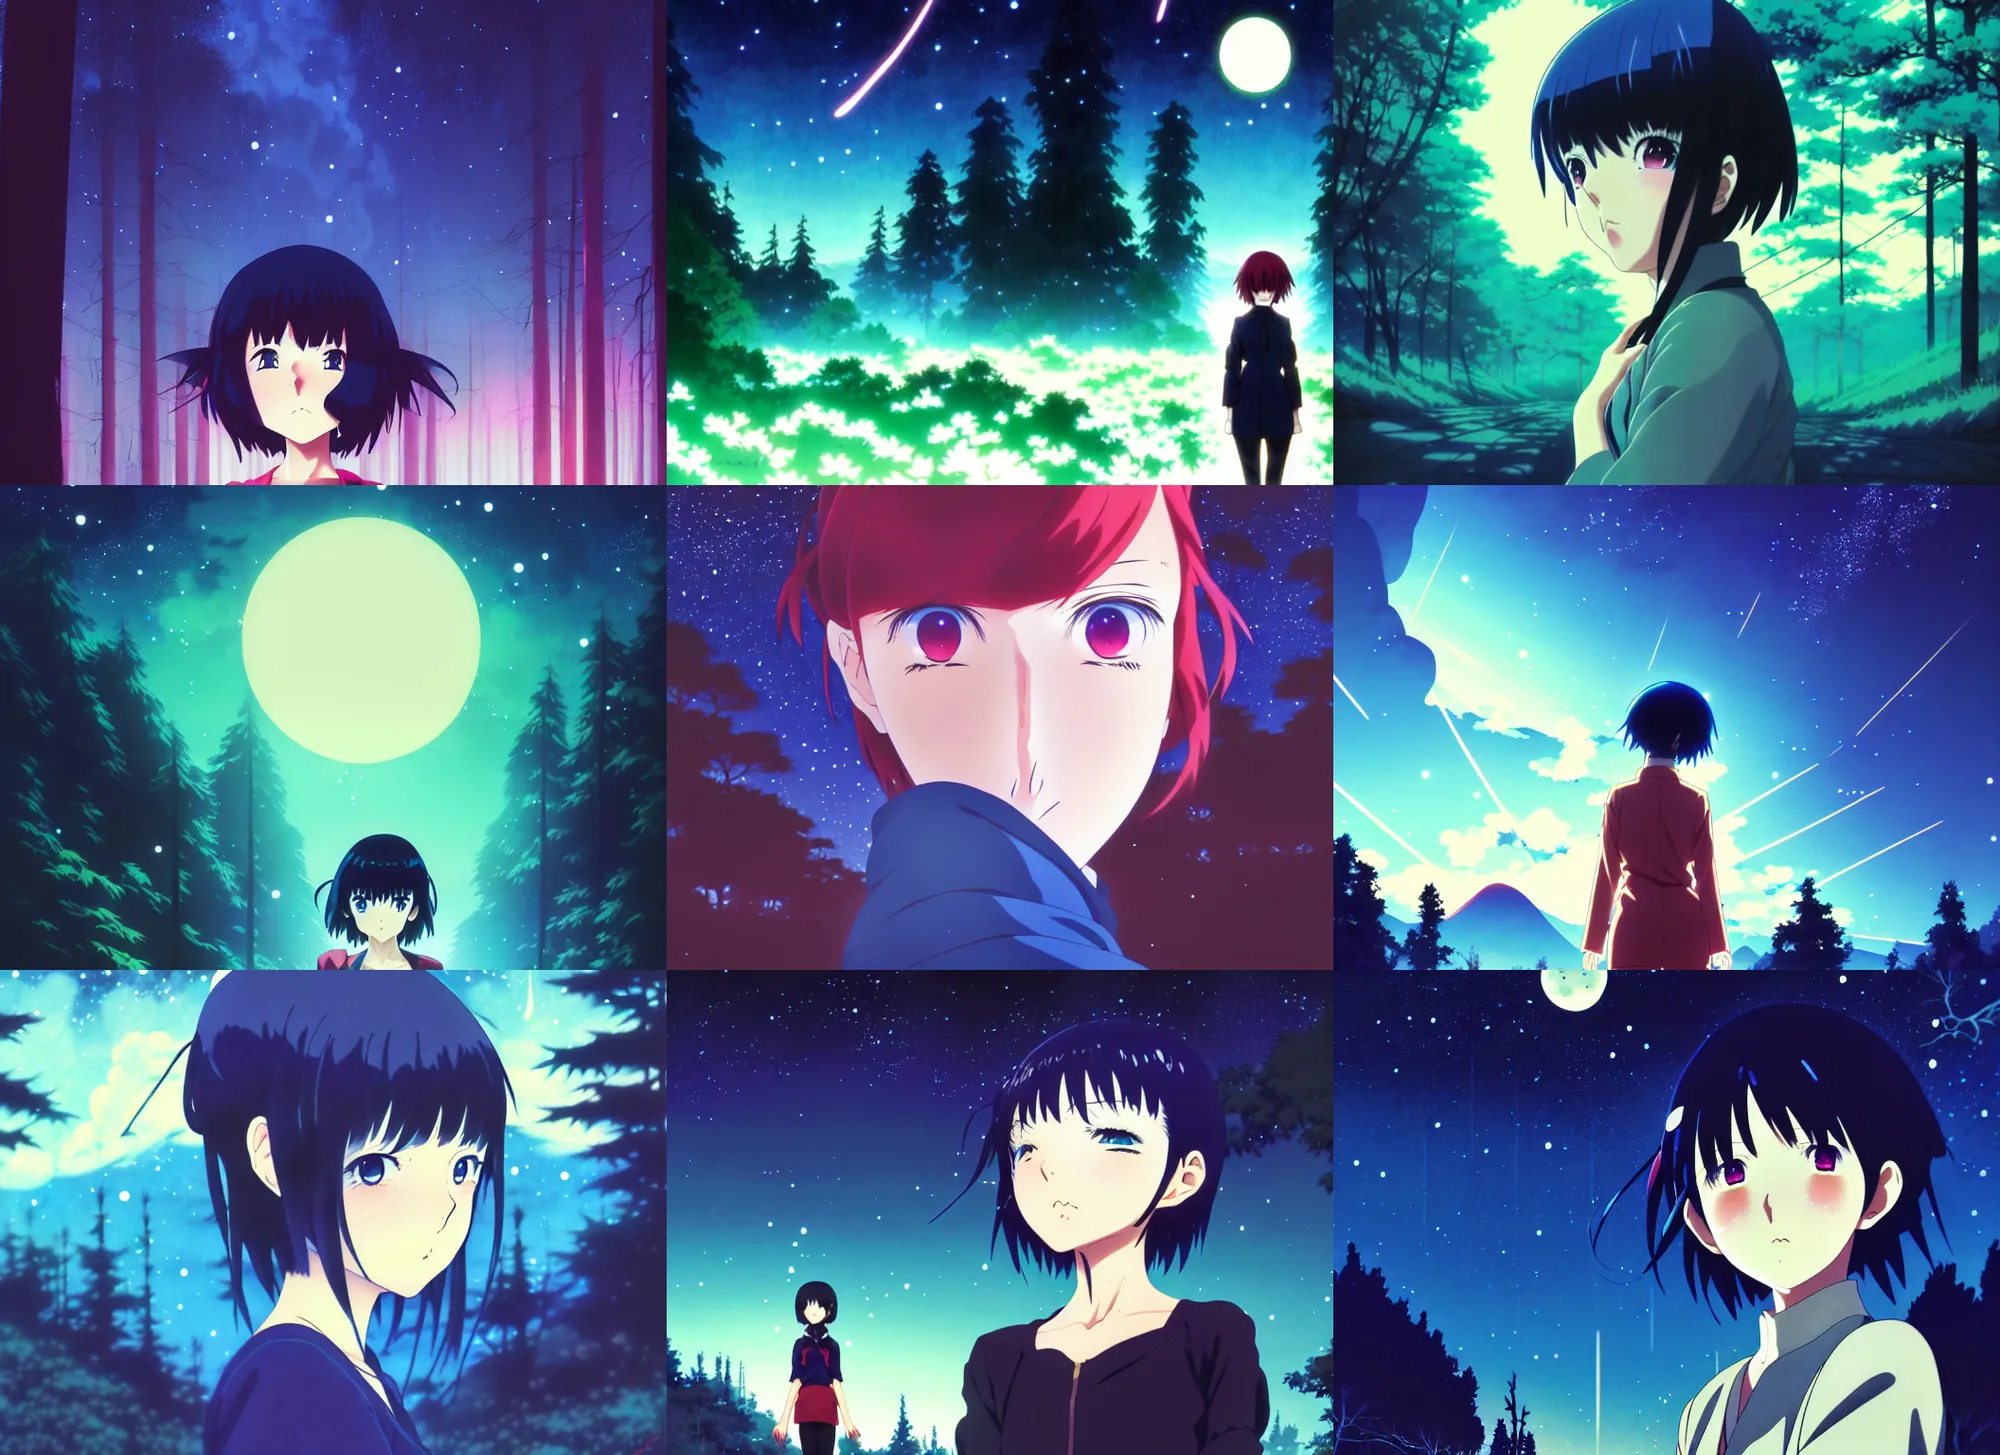 Prompt: anime cels, anime key visual, young woman traveling in a forest at night, night sky, nebula, very dark, cute face by ilya kuvshinov, yoh yoshinari, dynamic pose, dynamic perspective, rounded eyes, ghost in the shell, kyoani, smooth facial features, dramatic lighting, psycho pass